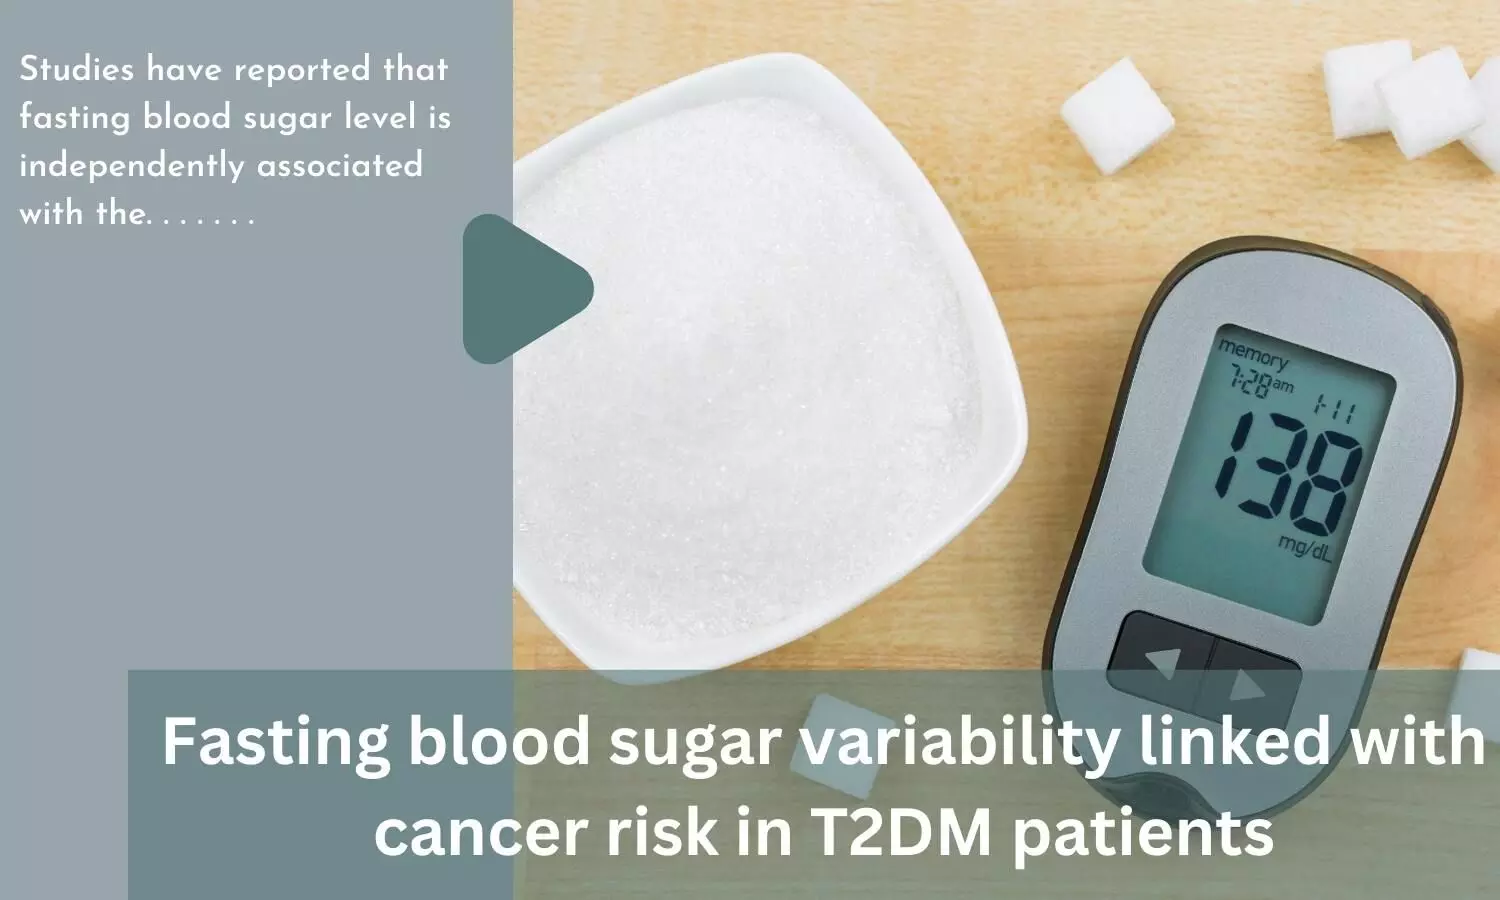 Fasting blood sugar variability linked with cancer risk in T2DM patients